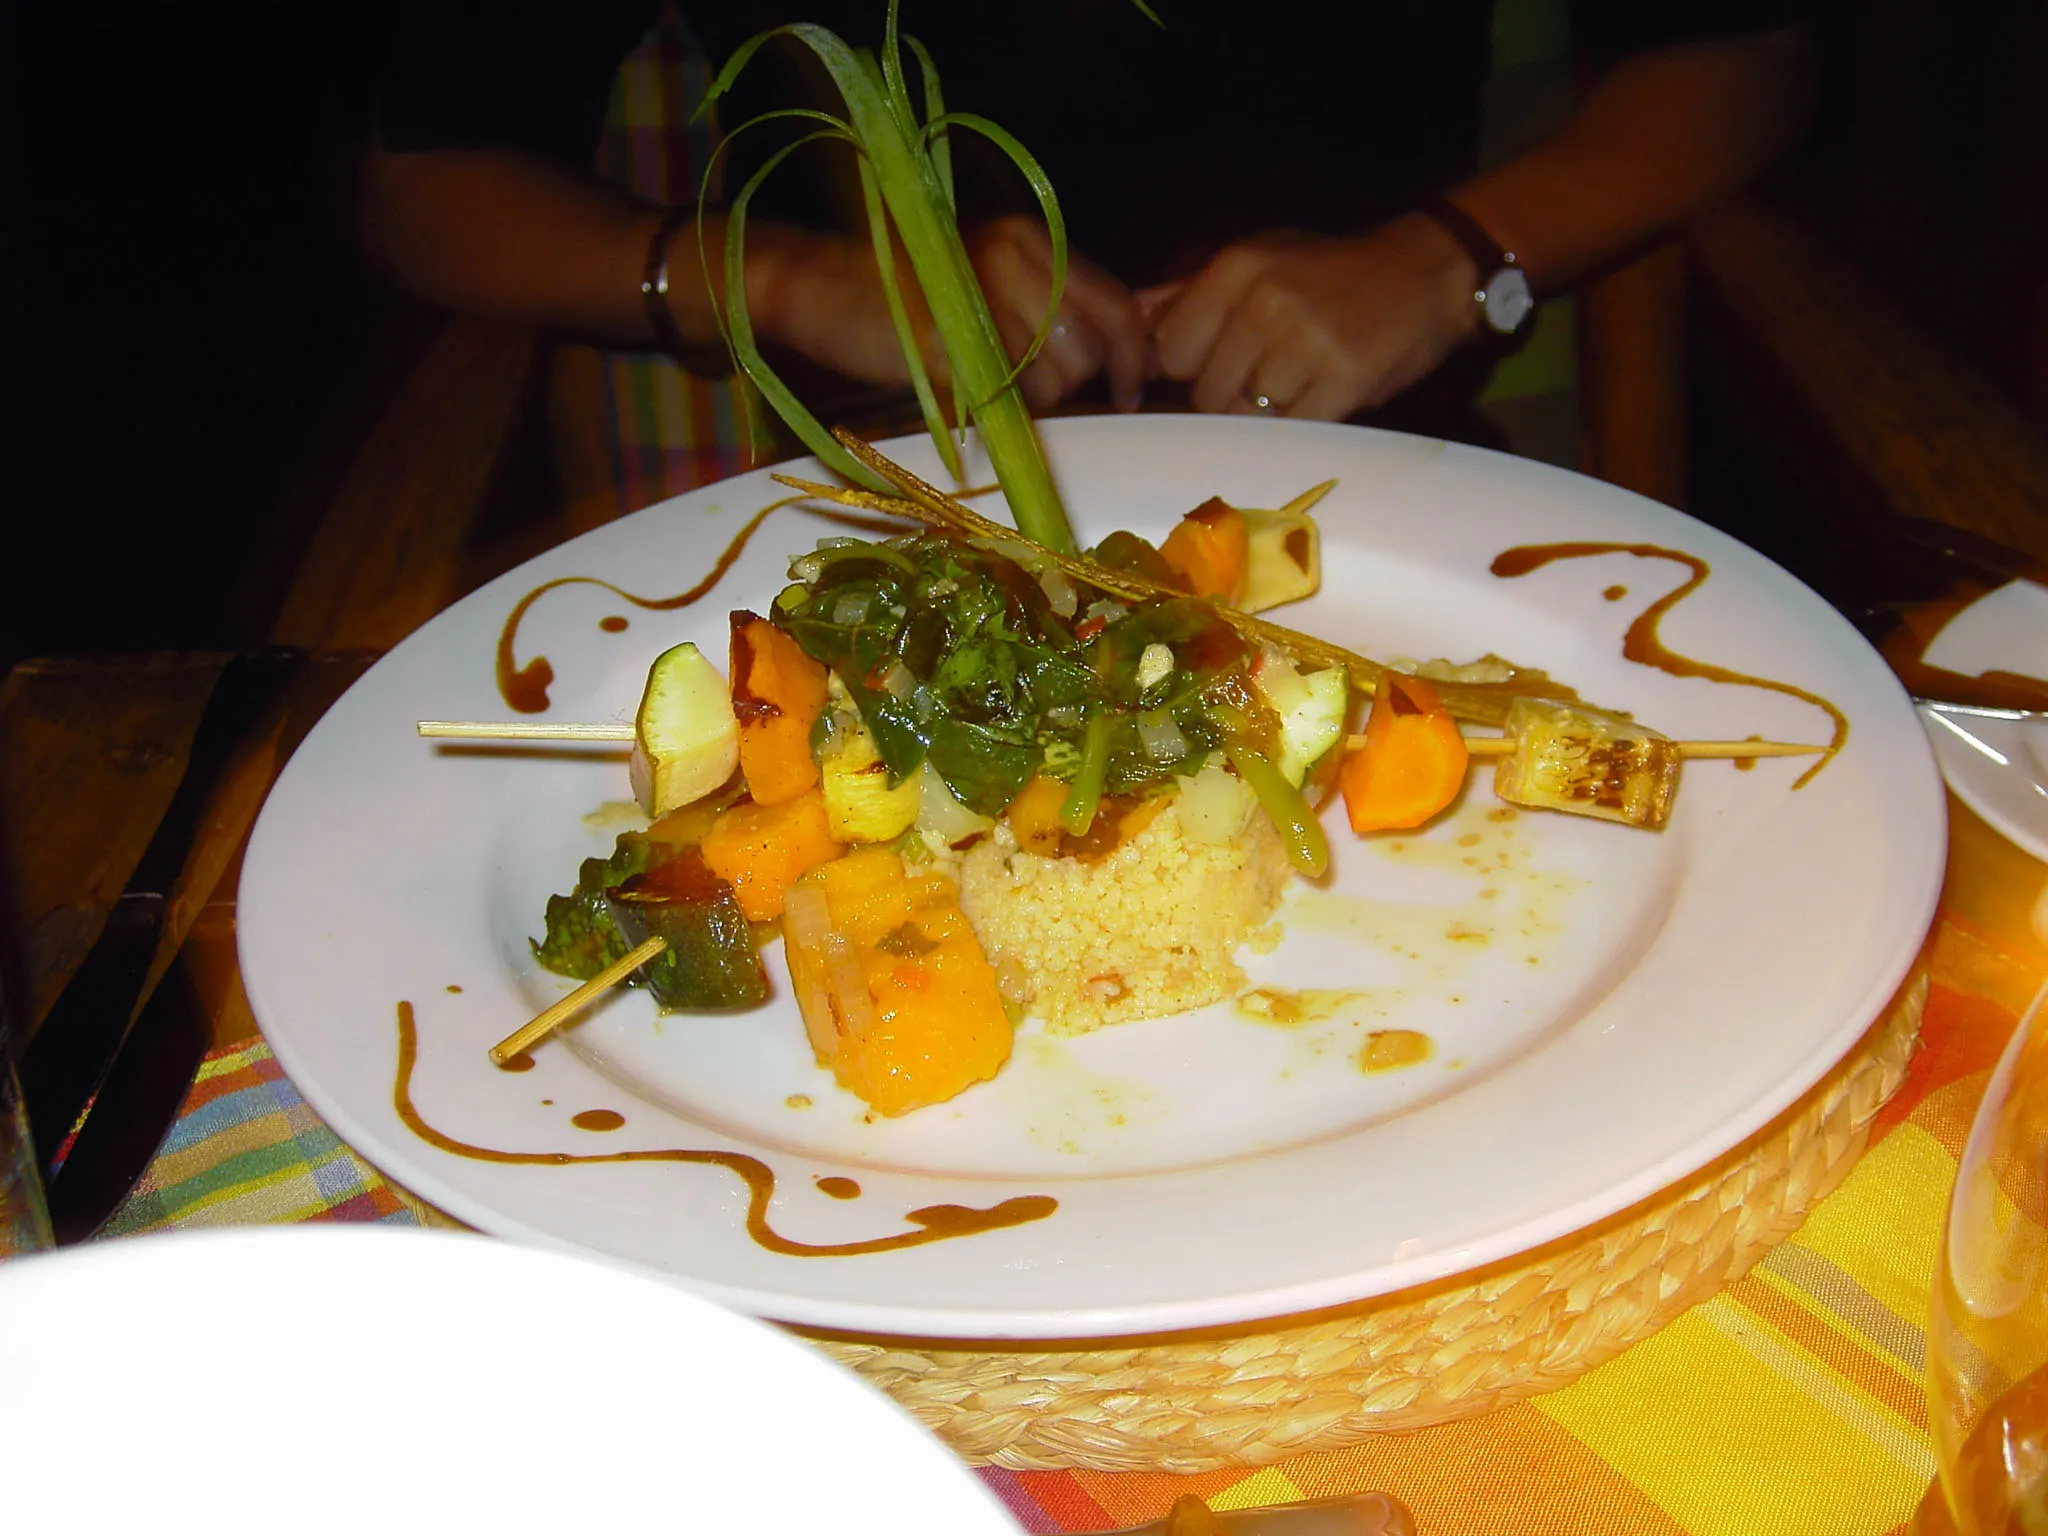 Fancy food plating at Dasheene in Ladera Resort, one of the best restaurants in St. Lucia, grilled vegetables and fruit skewers